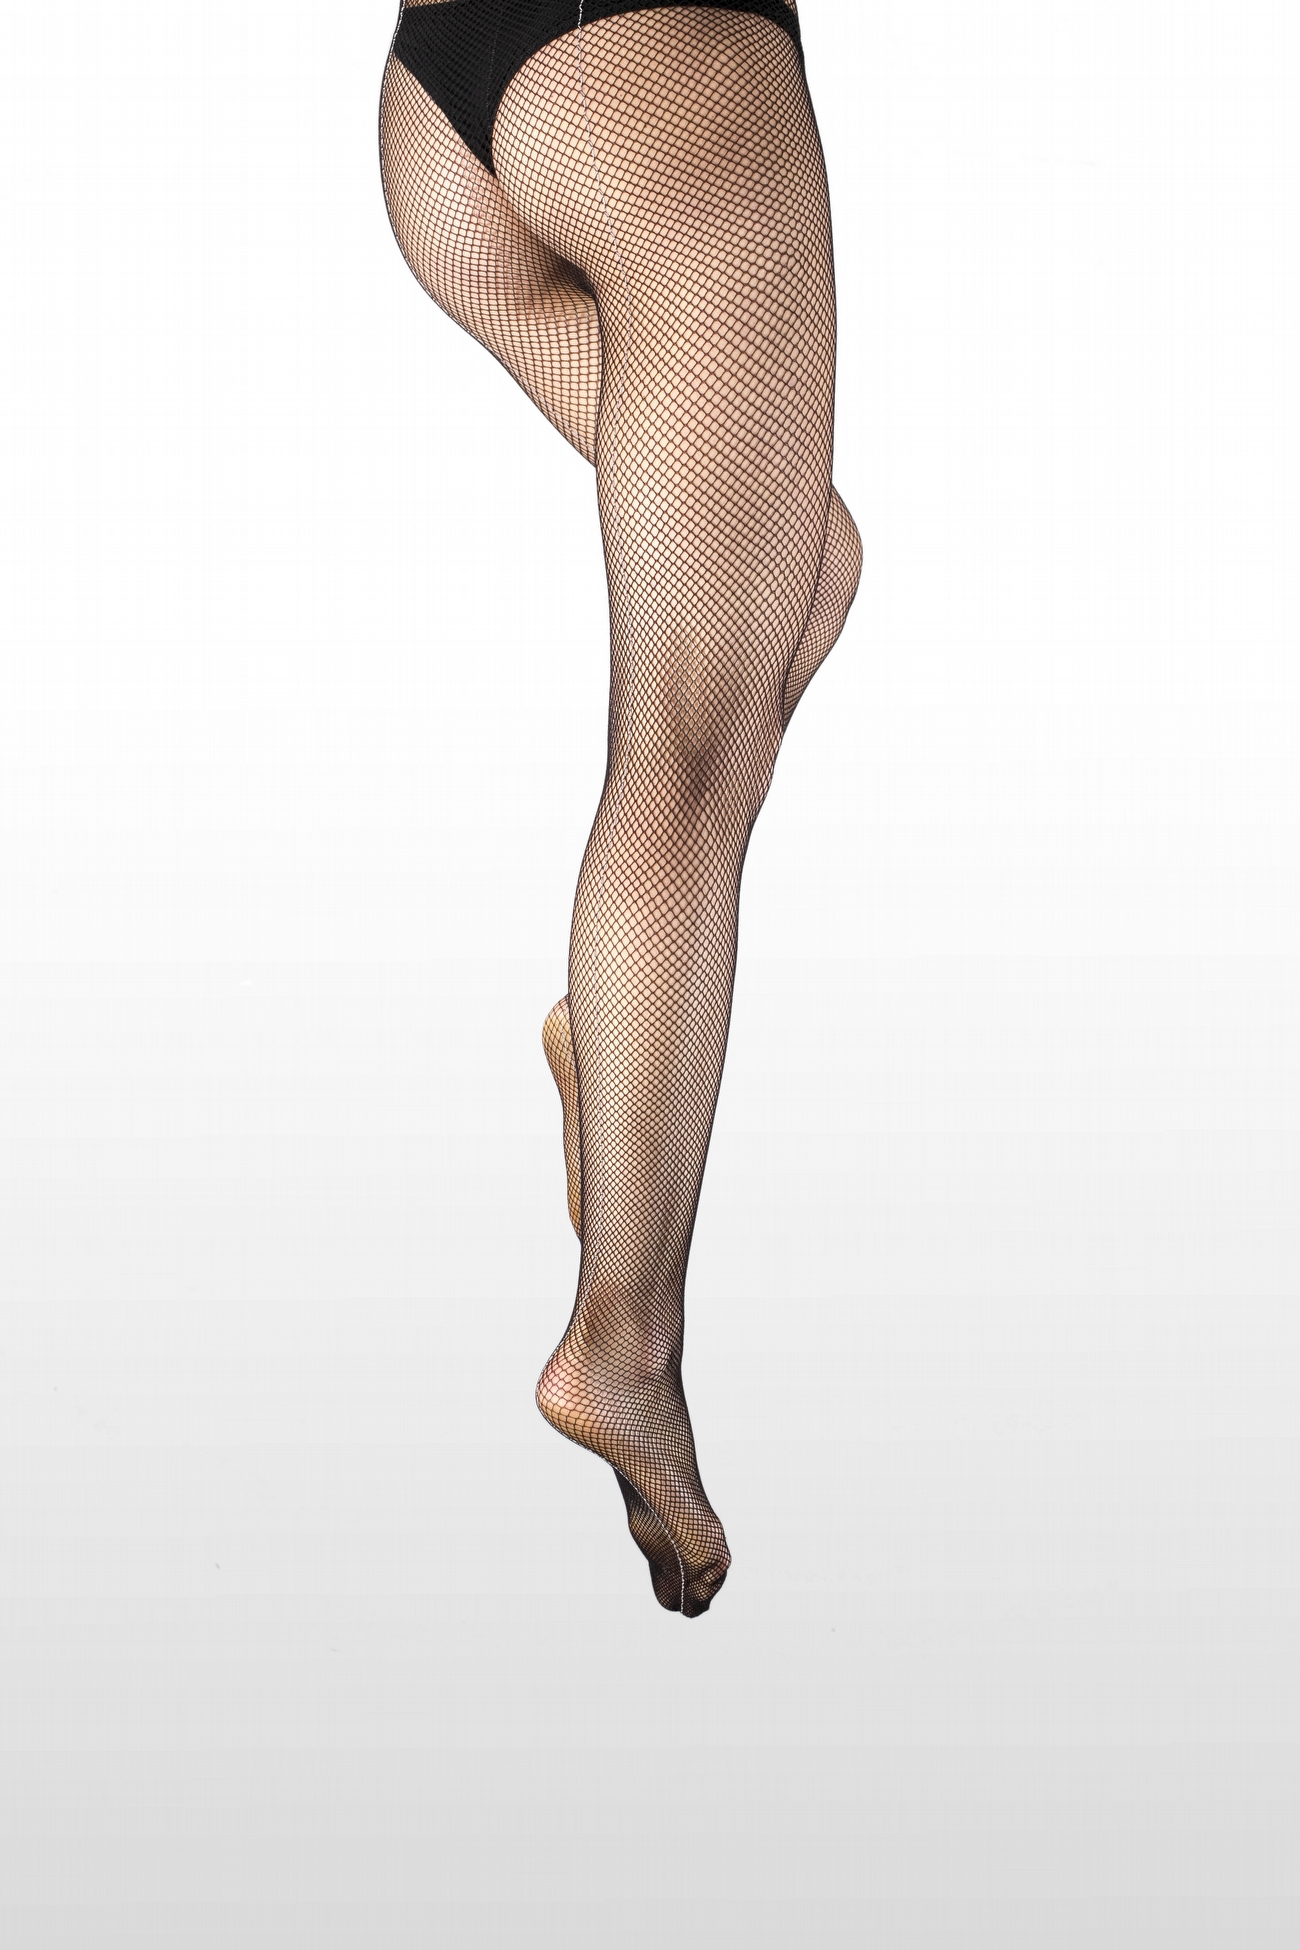 Buy online Tights made in Italy